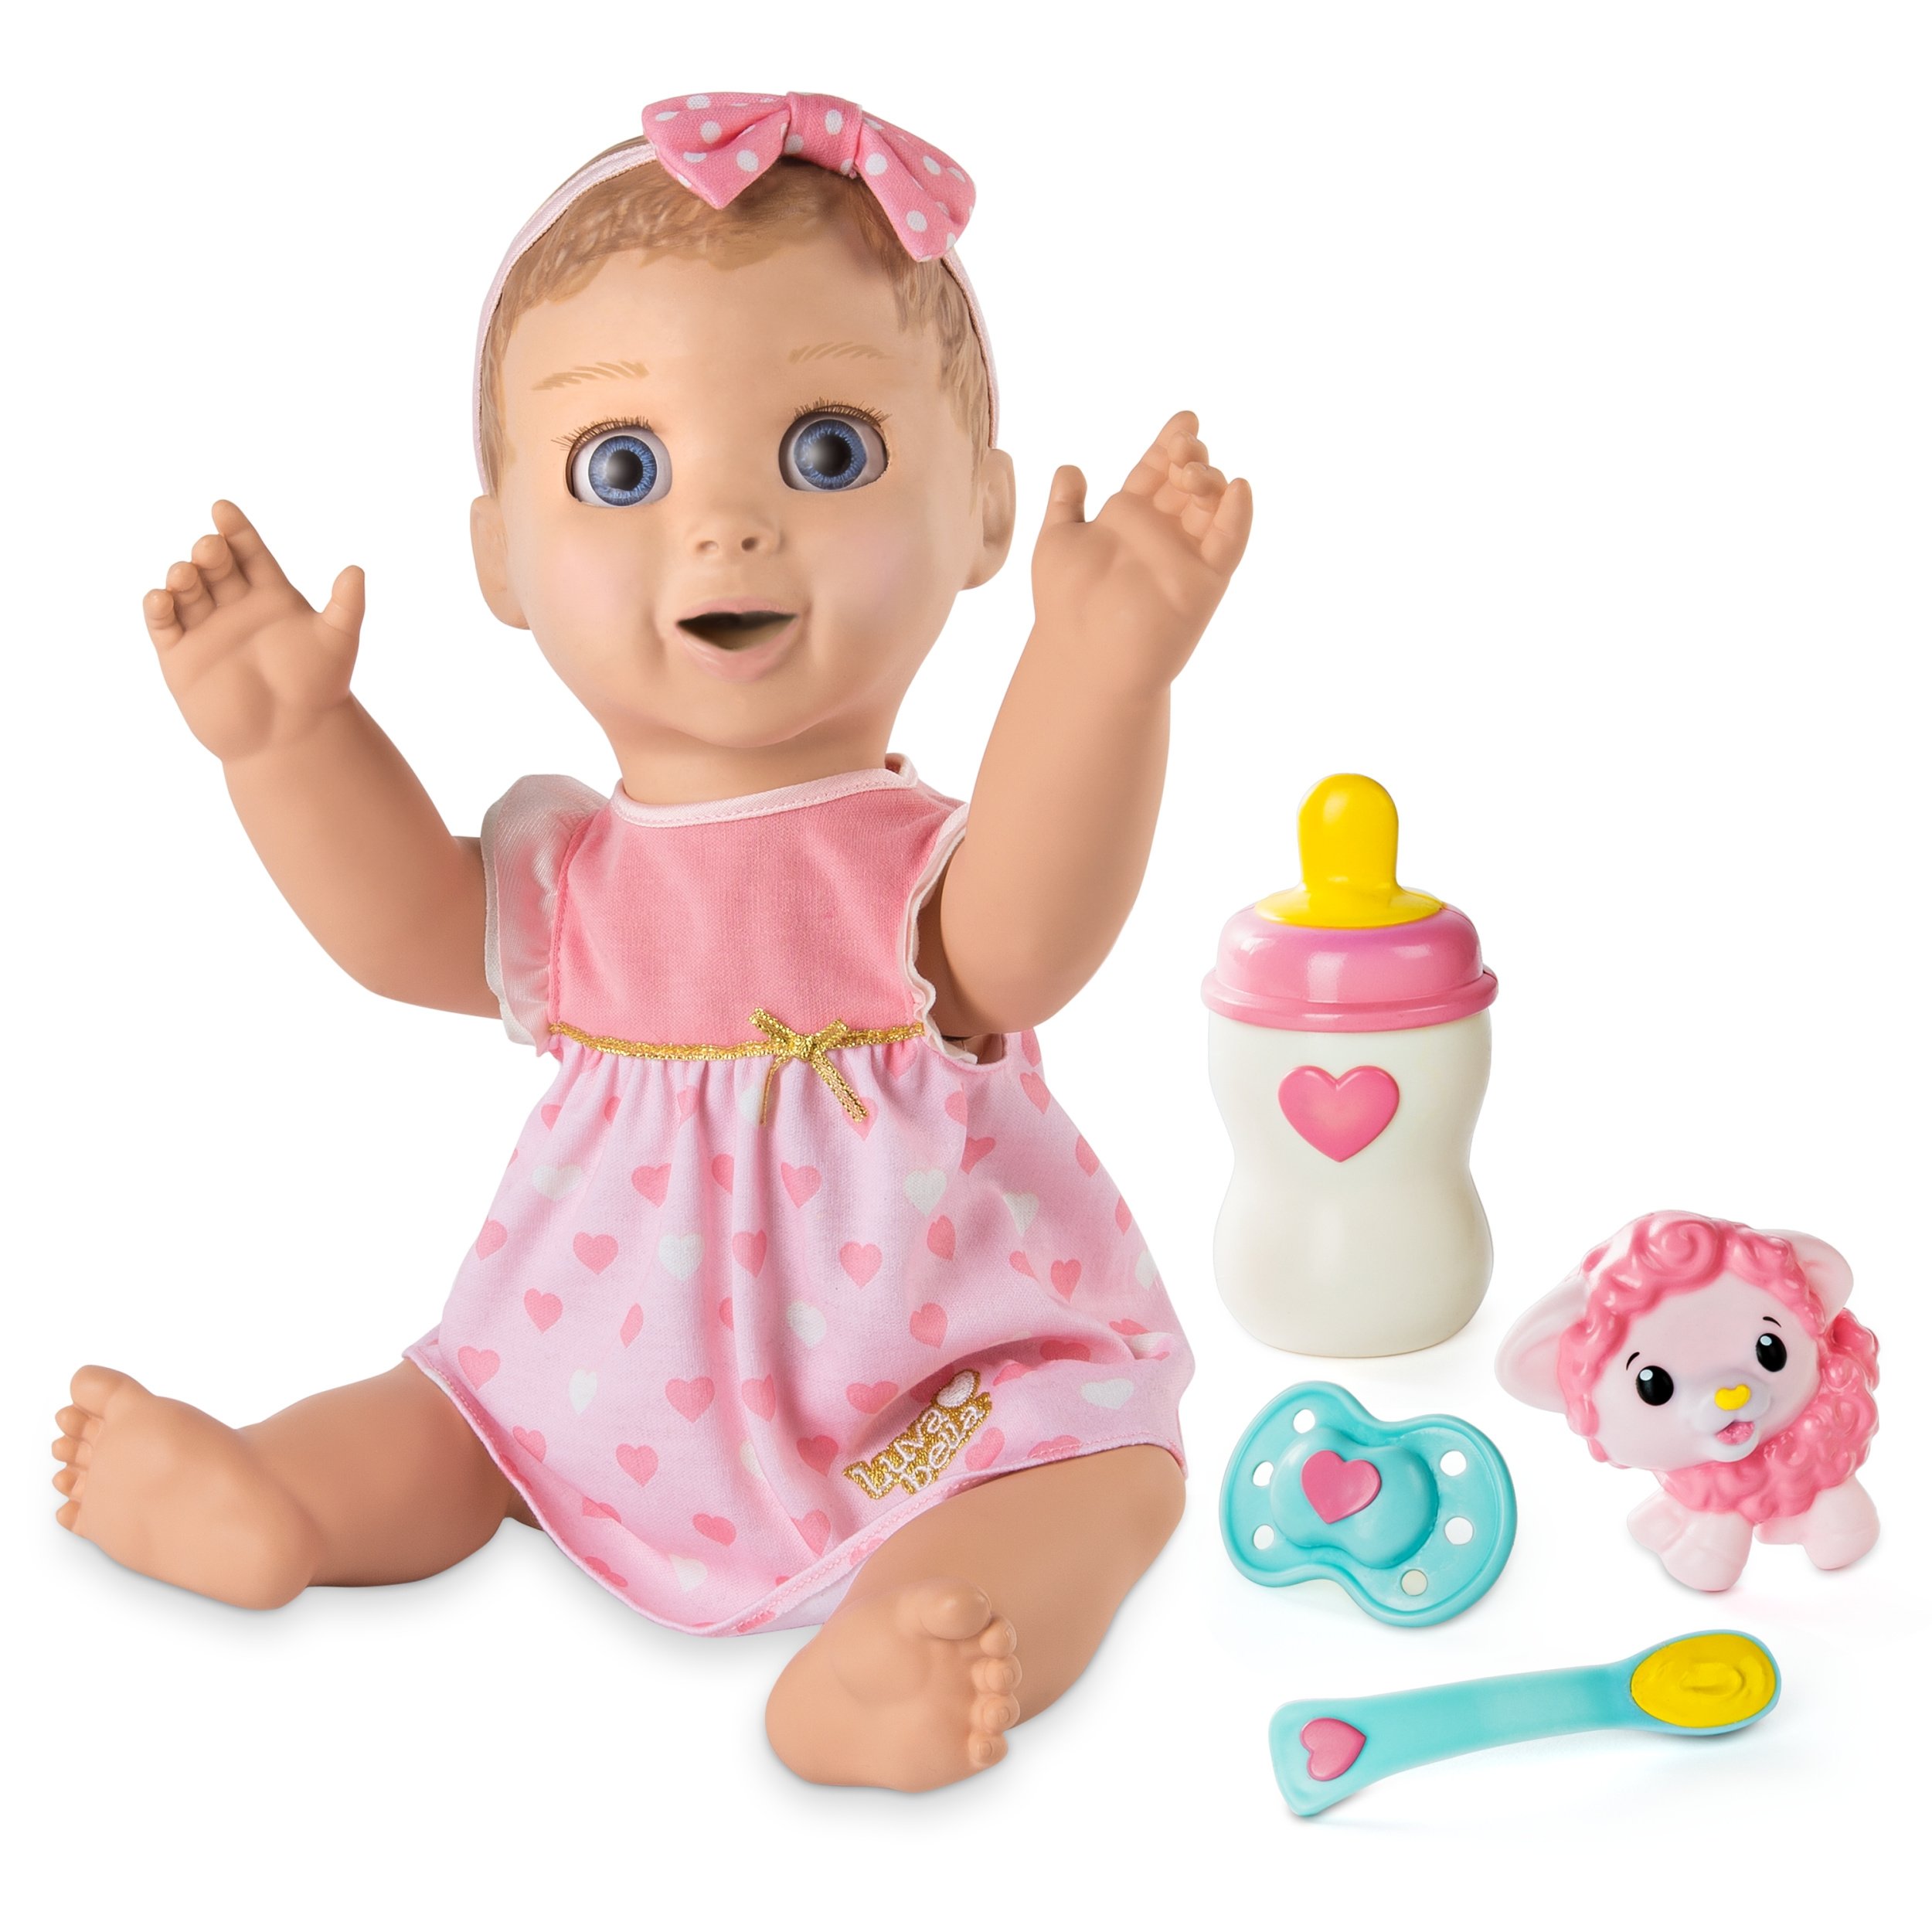 Luvabella - Blonde Hair - Responsive Baby Doll with Realistic Expressions and Movement - image 1 of 8